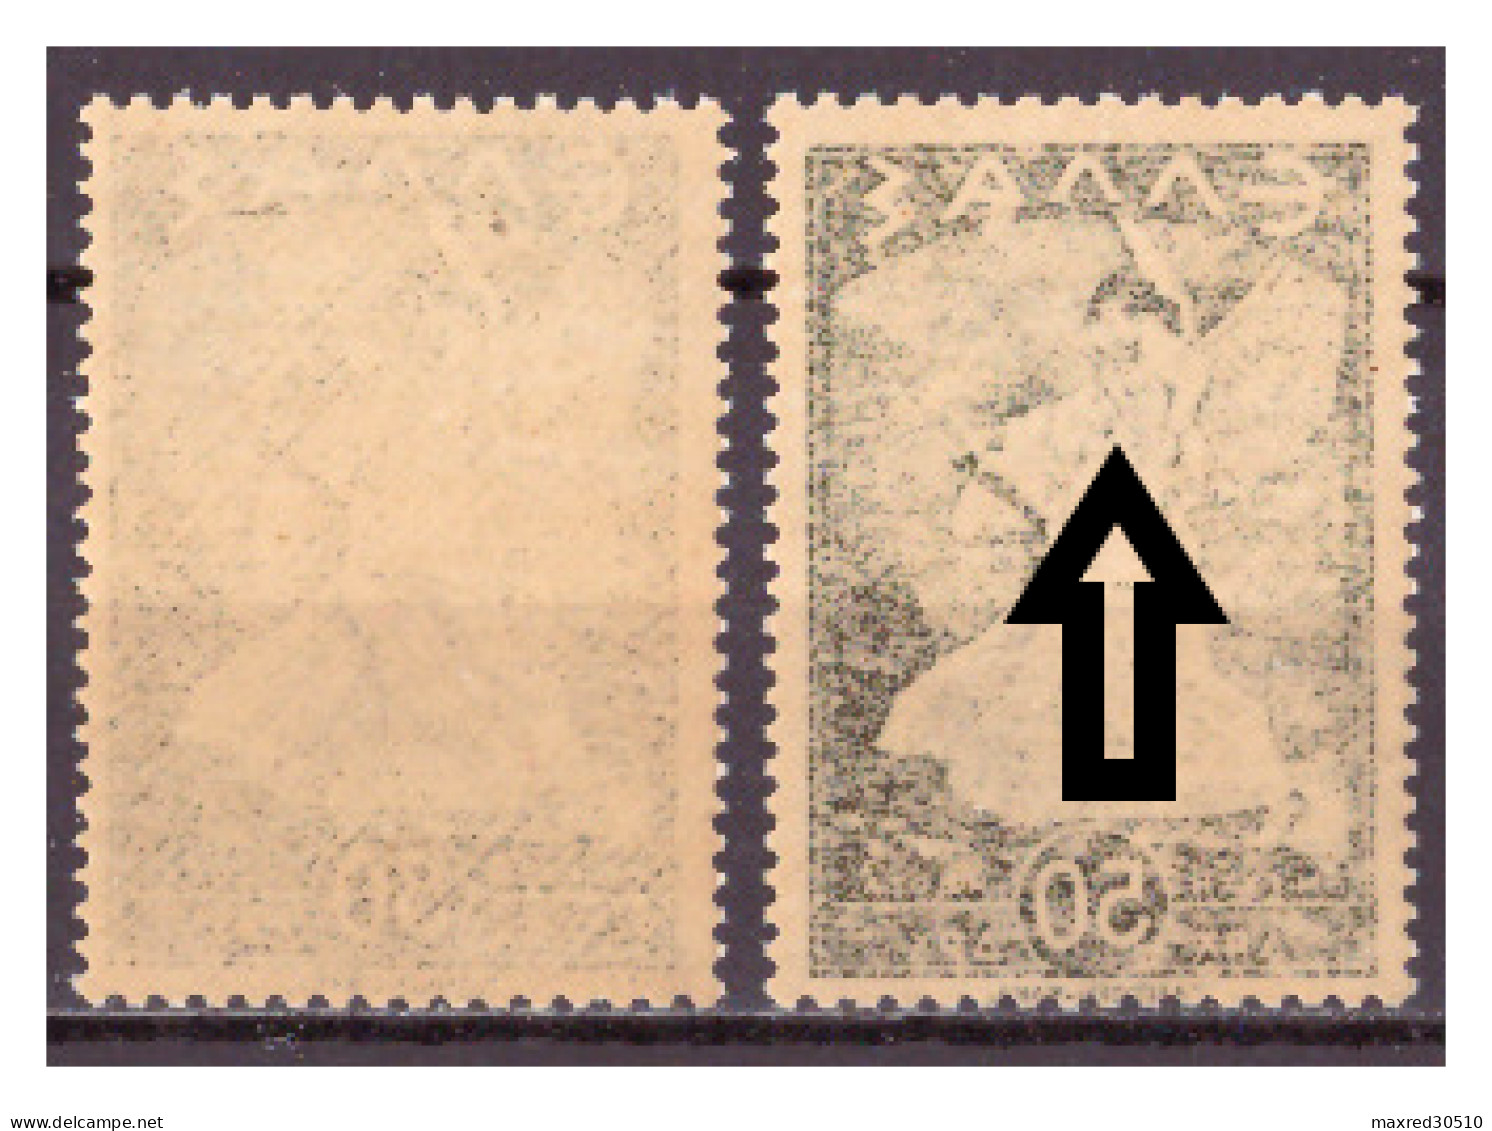 GREECE 1945 2X50L. OF THE "GLORY ISSUE" THE 2ND ONE (SEE ARROWS) WITH MIRROR PRINTING AT THE GUM ERROR MNH - Abarten Und Kuriositäten